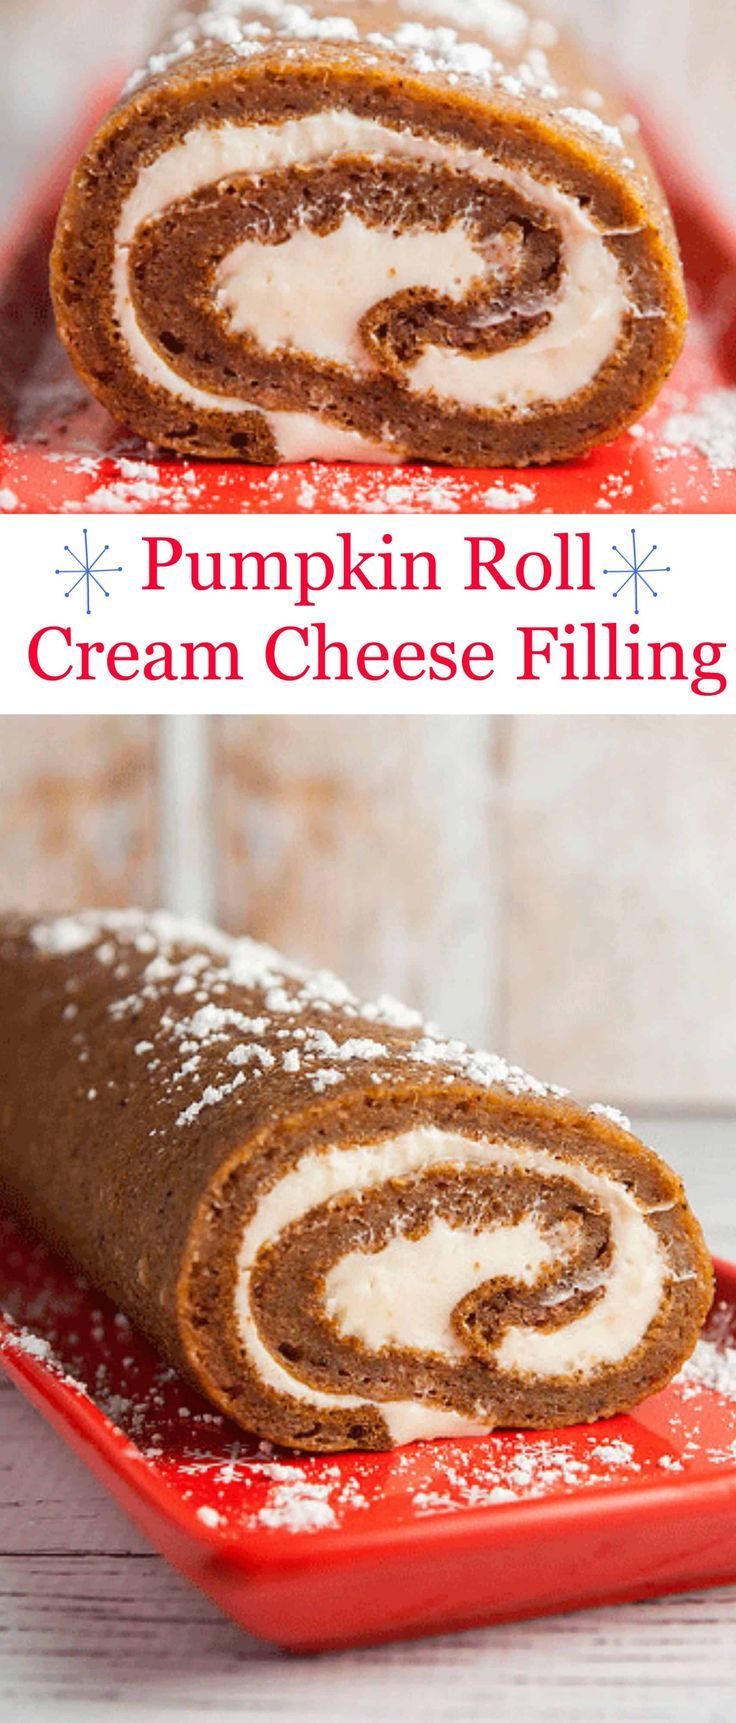 Pumpkin Roll With Cream Cheese Filling , Easy Recipe for